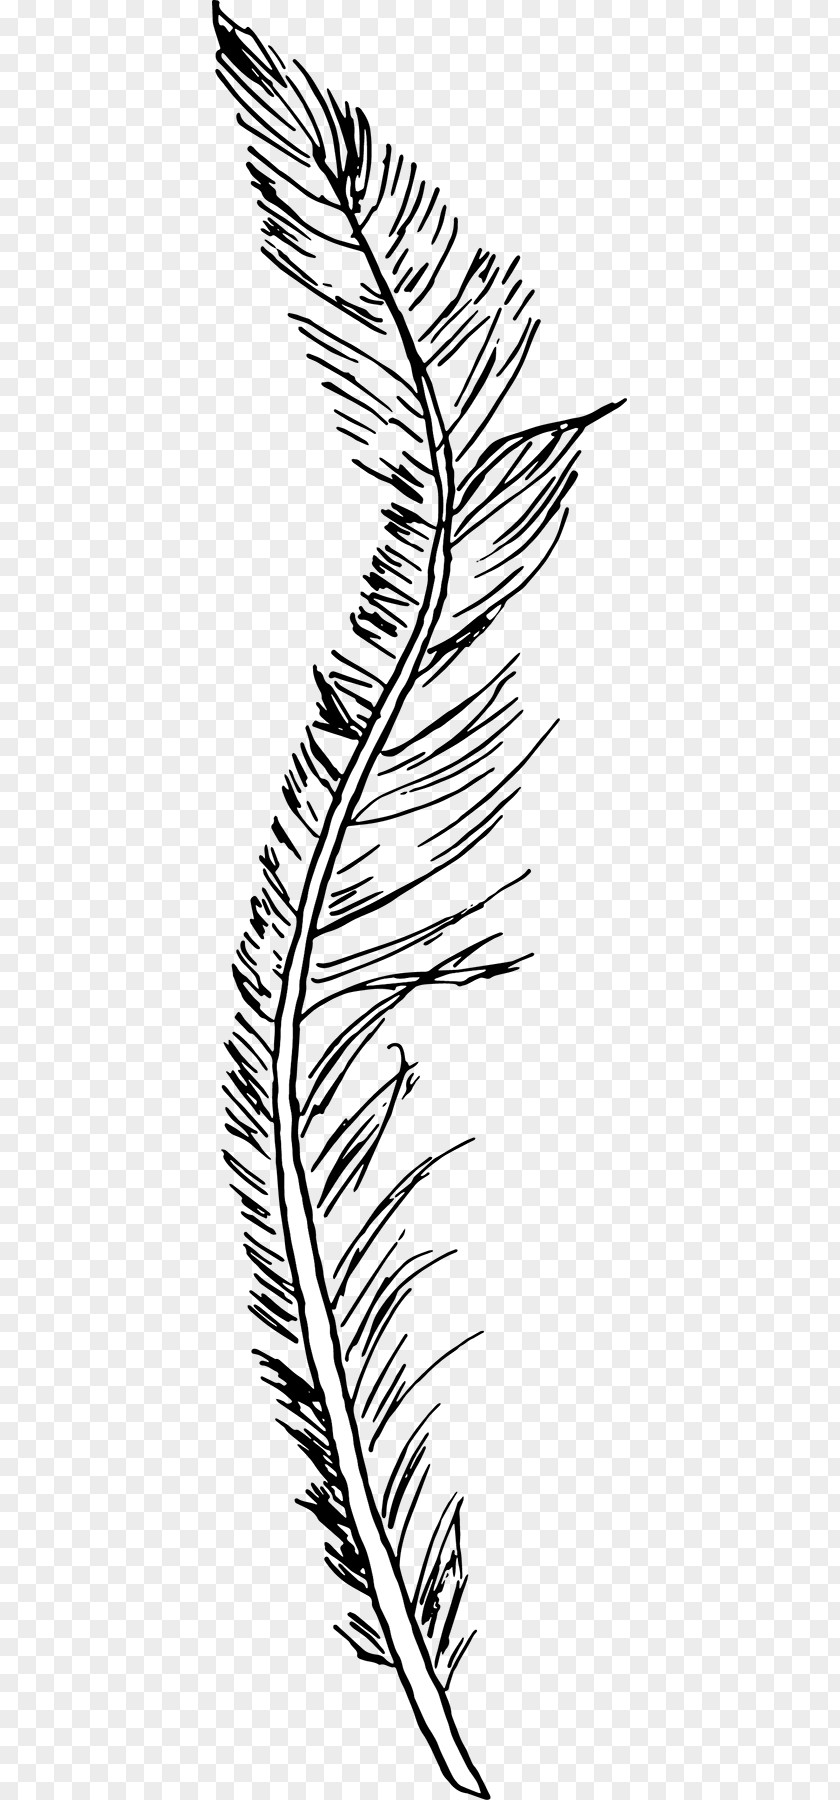 Falling Feathers Line Art Leaf White Feather PNG